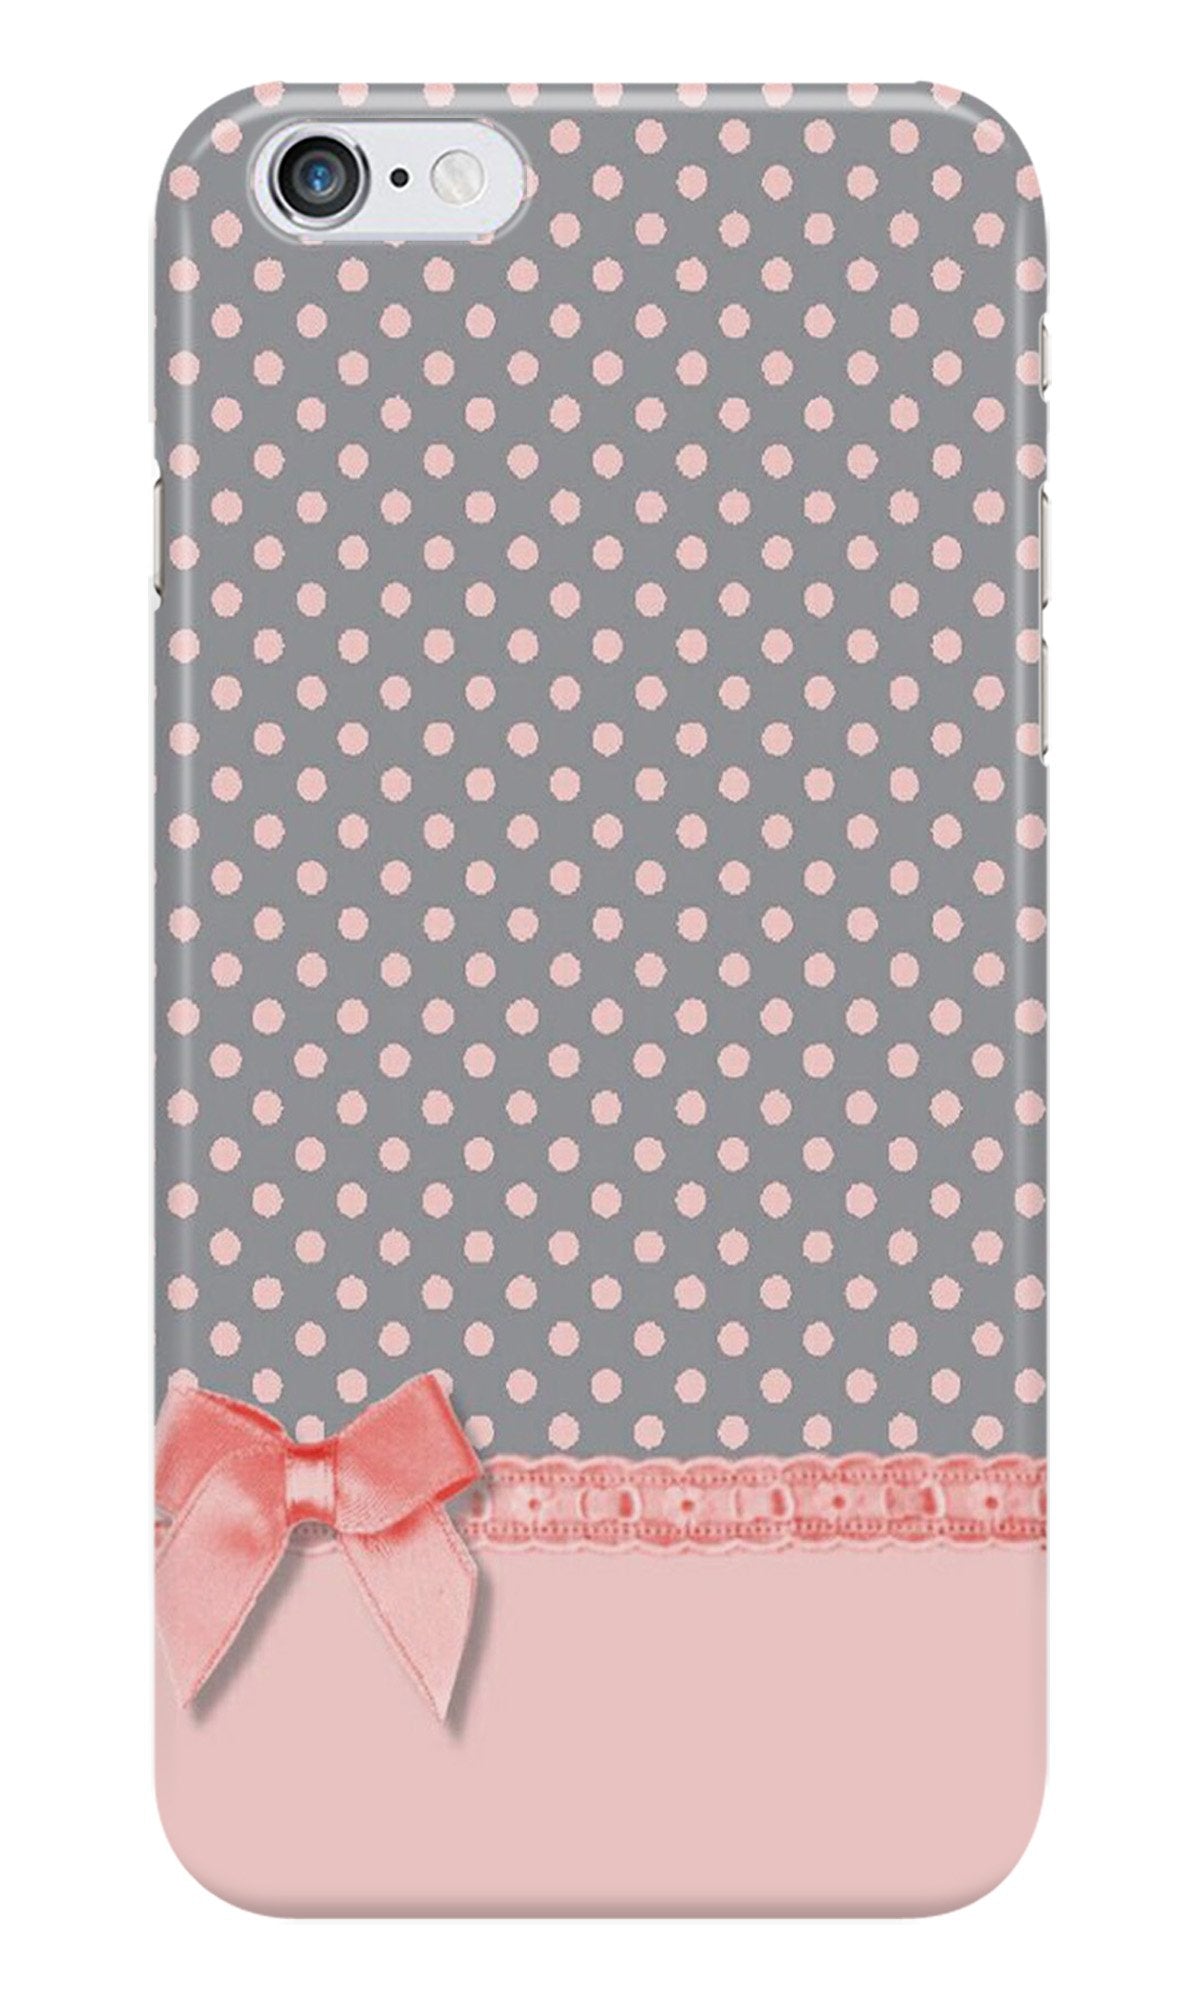 Gift Wrap2 Case for iPhone 6 Plus/ 6s Plus